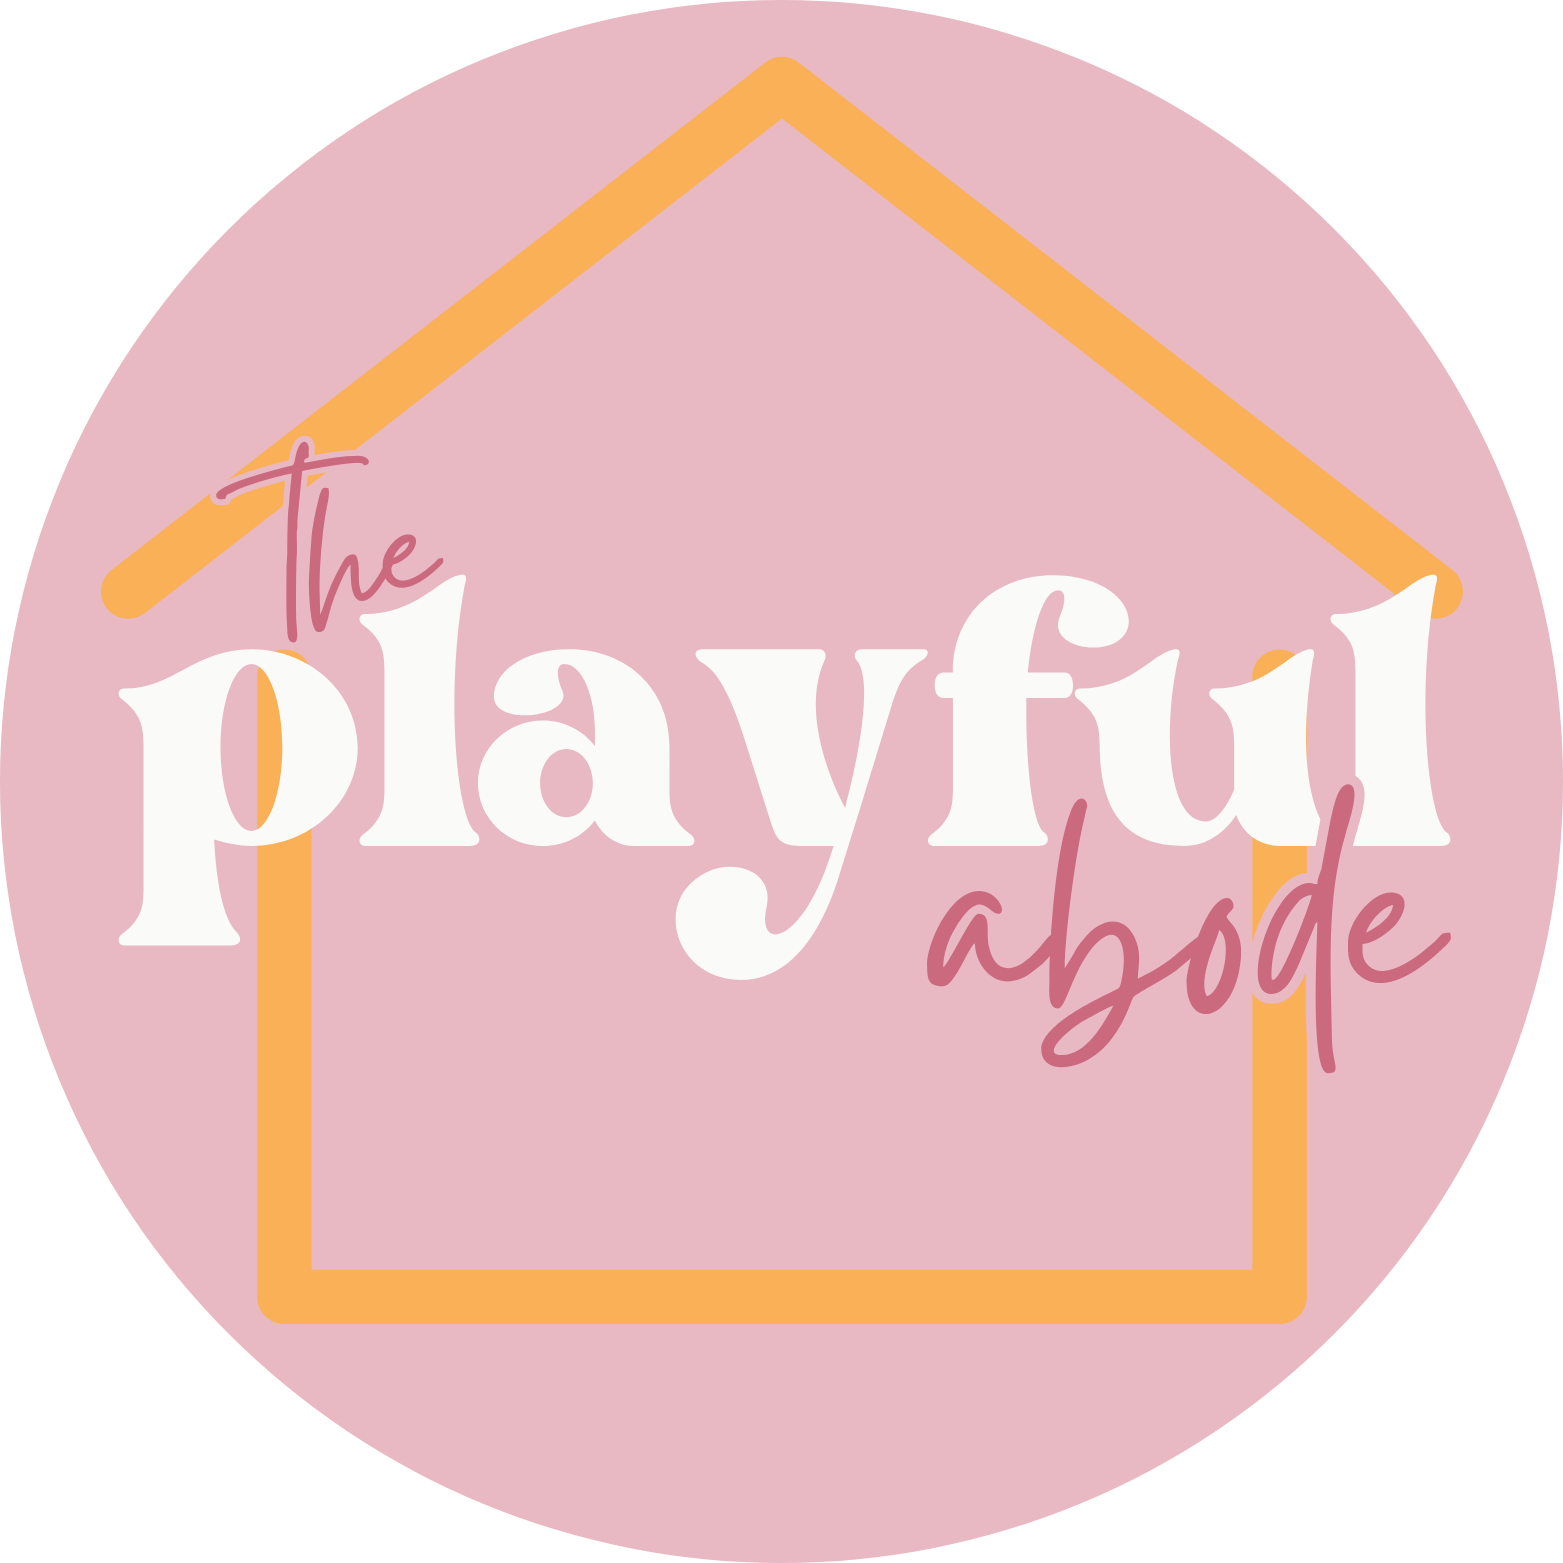 The Playful Abode